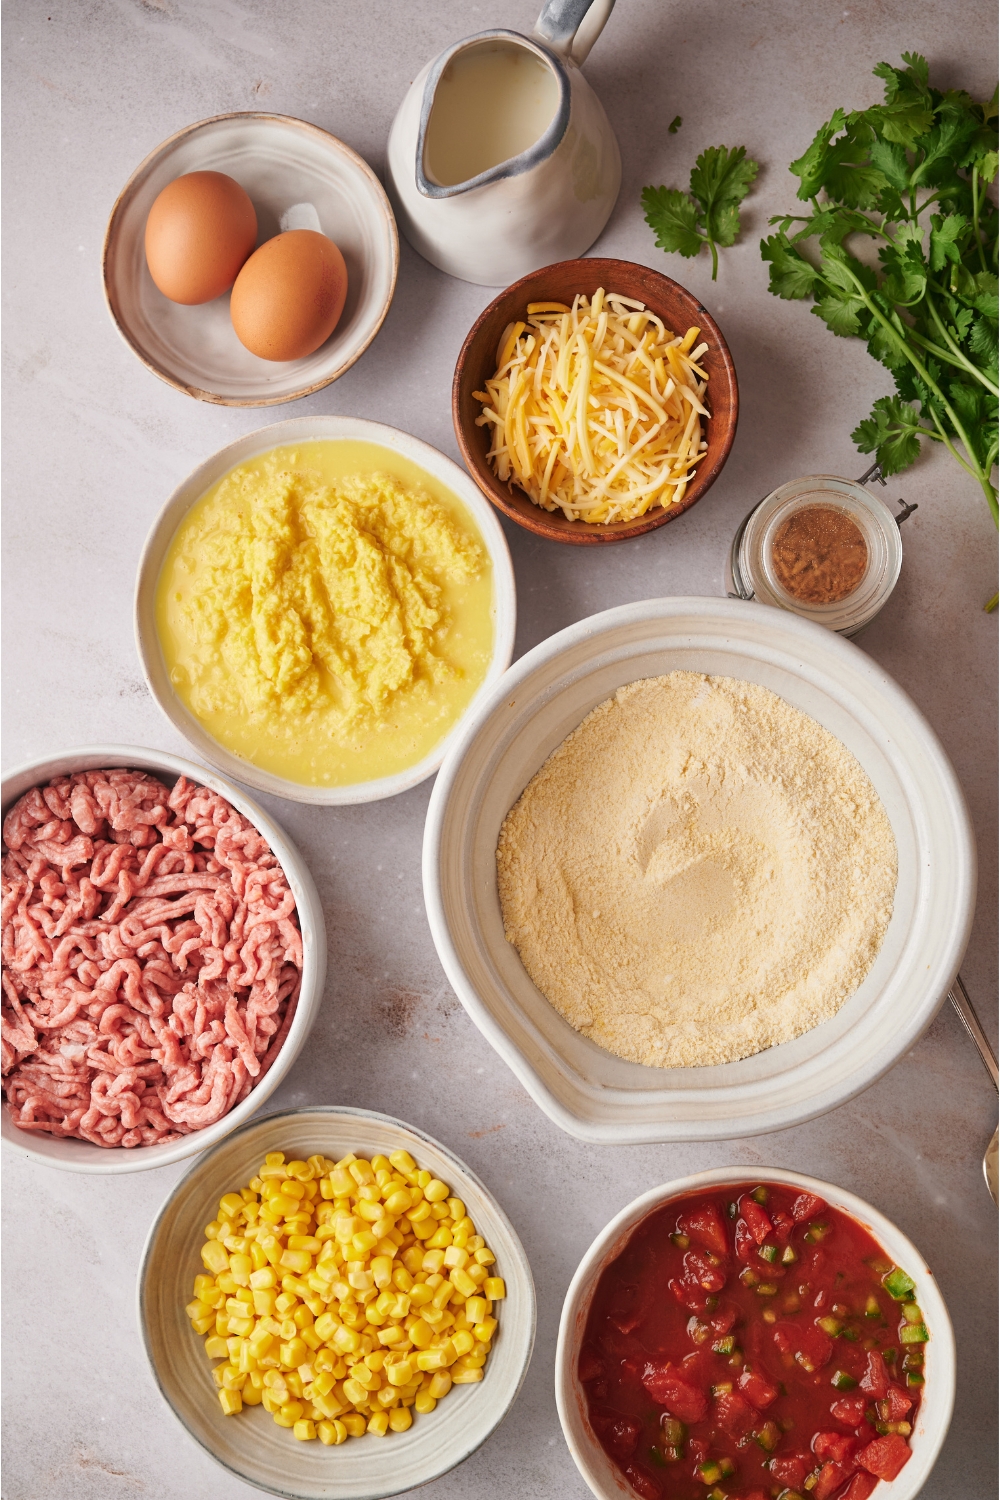 A bowl with two eggs, a bowl of shredded cheese, a bowl of jiffy cornbread mix, a bowl of ground beef, a bowl of corn, a bowl of creamed corn, and a bowl of crushed tomatoes all on a grey counter.